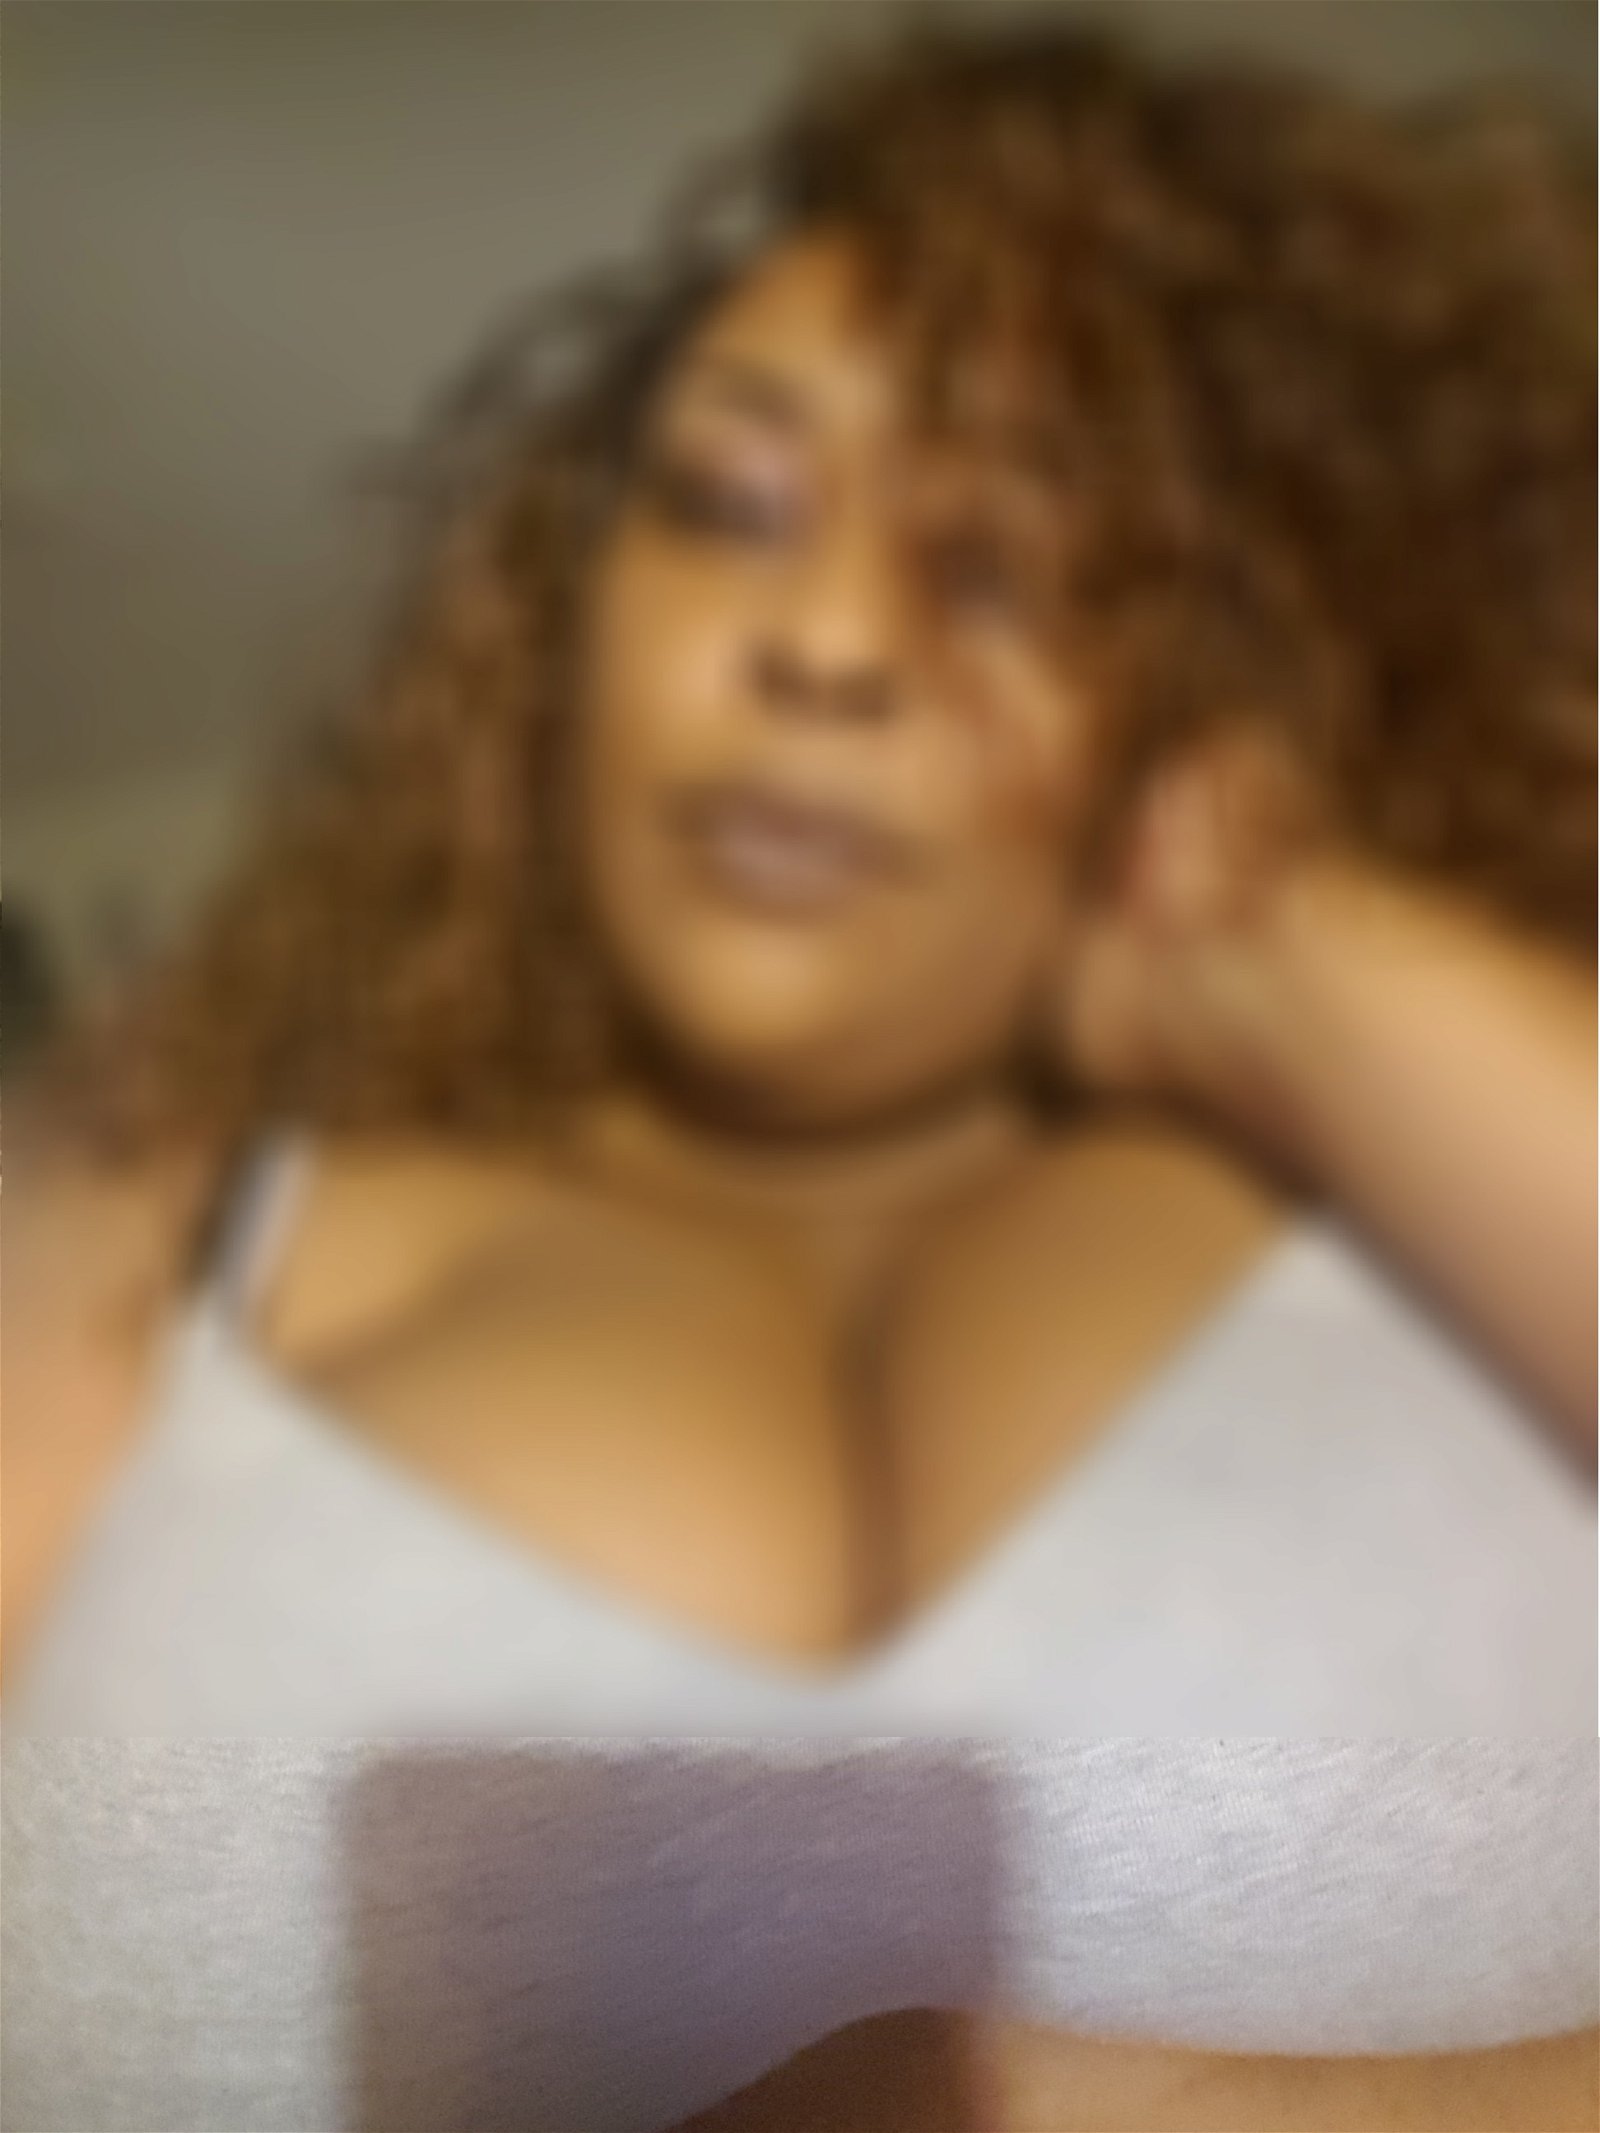 Photo by TK The Goddess with the username @TheKinkstress, who is a verified user,  December 30, 2018 at 8:08 PM. The post is about the topic BBW and the text says 'An entire mood is upon me, beloveds.💋'